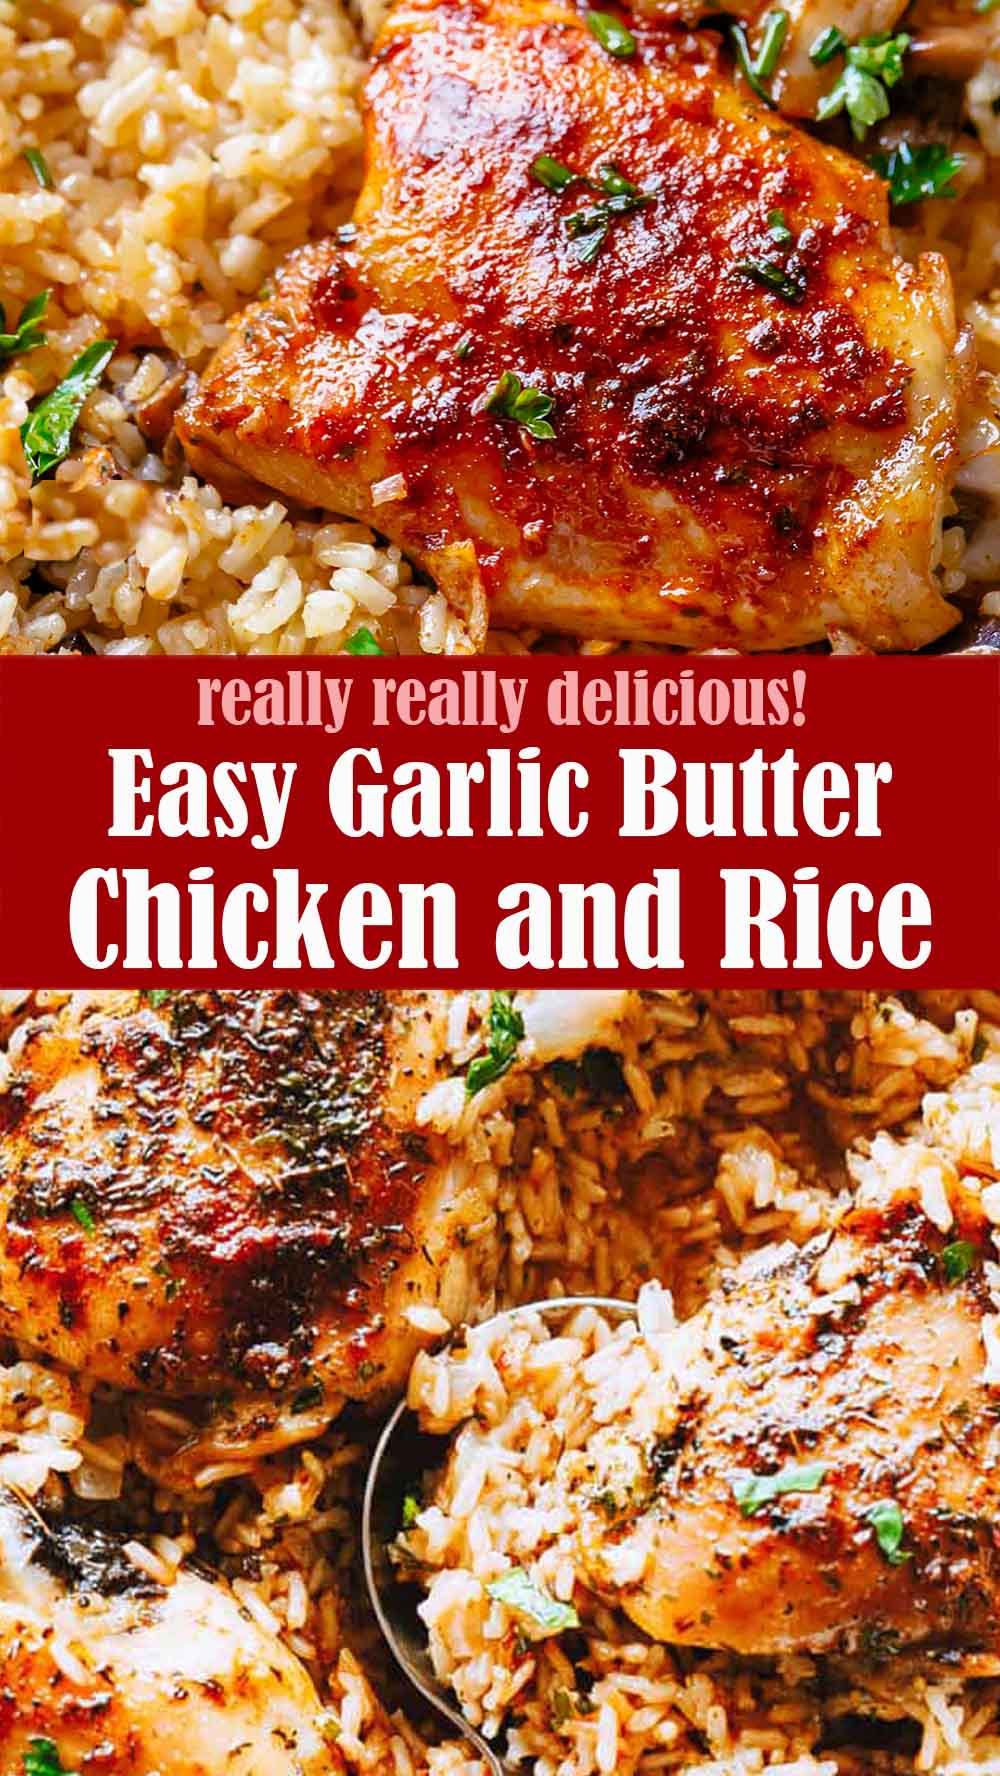 Easy Garlic Butter Chicken and Rice Recipe